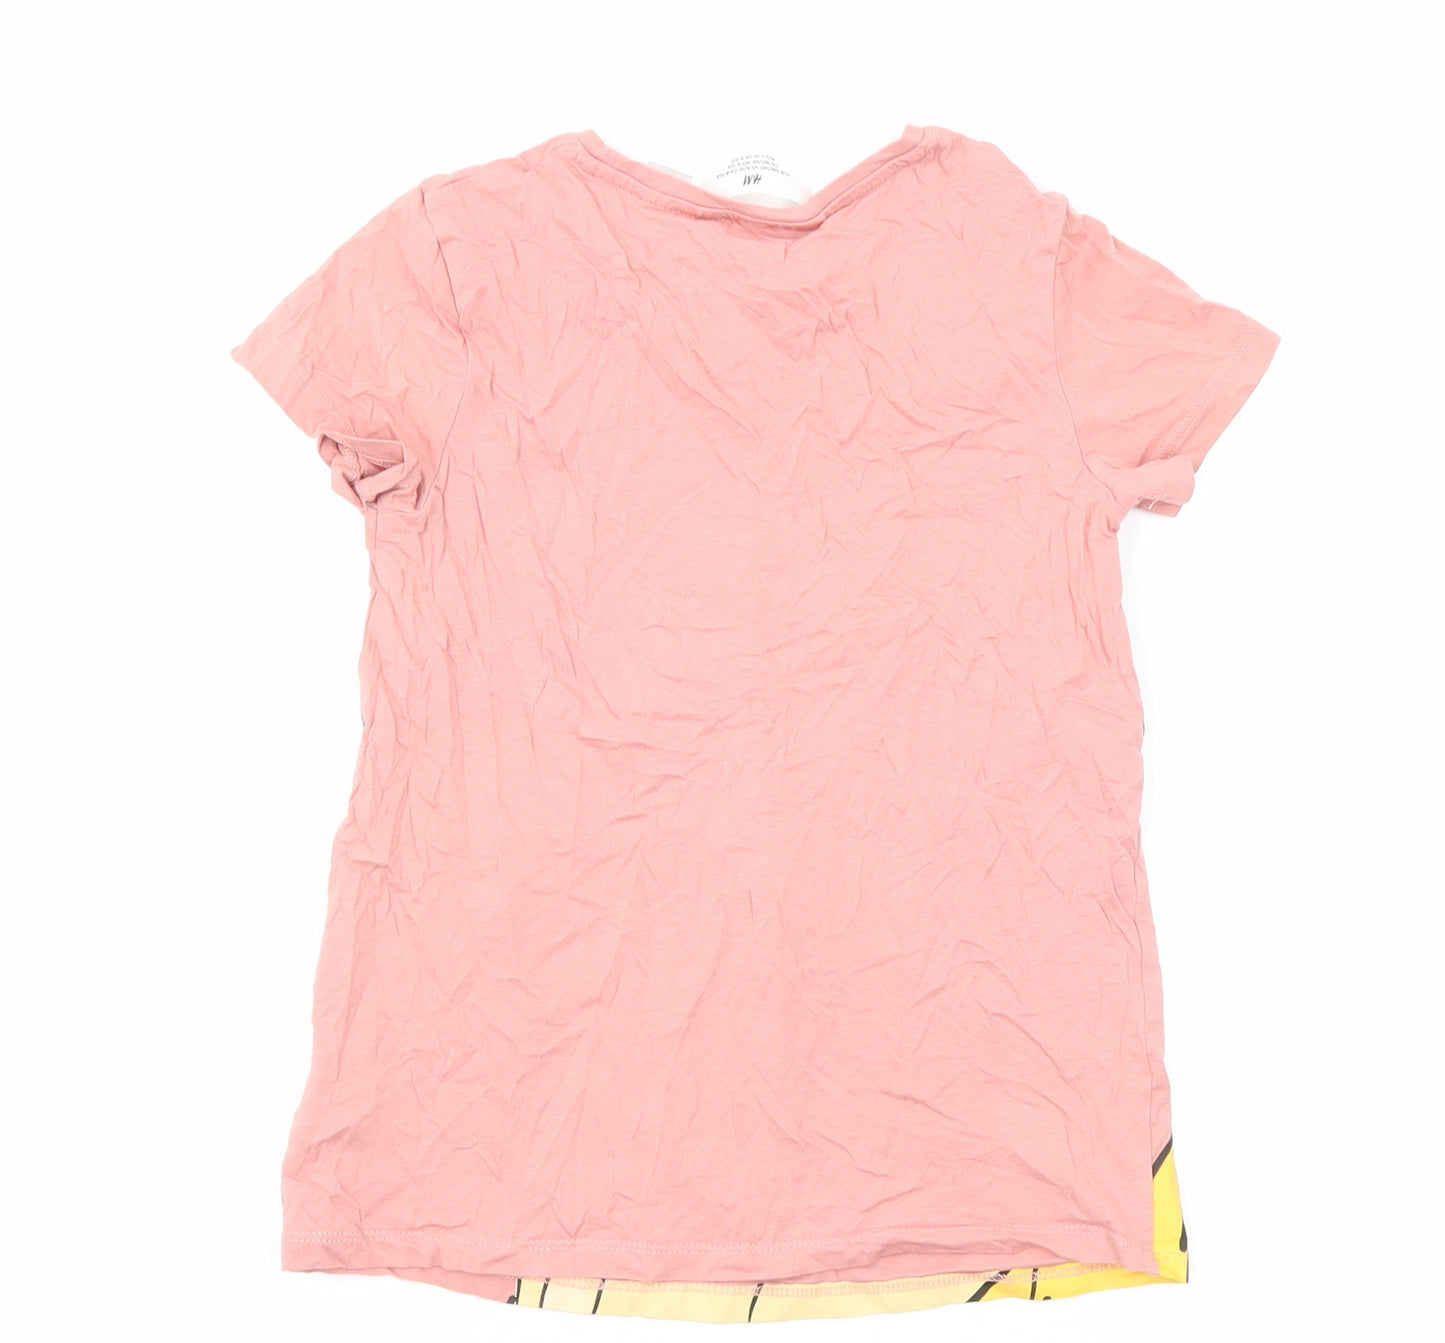 H&M Girls Pink Cotton Basic T-Shirt Size 8-9 Years Round Neck Pullover - 8-10 Years, The Lion King